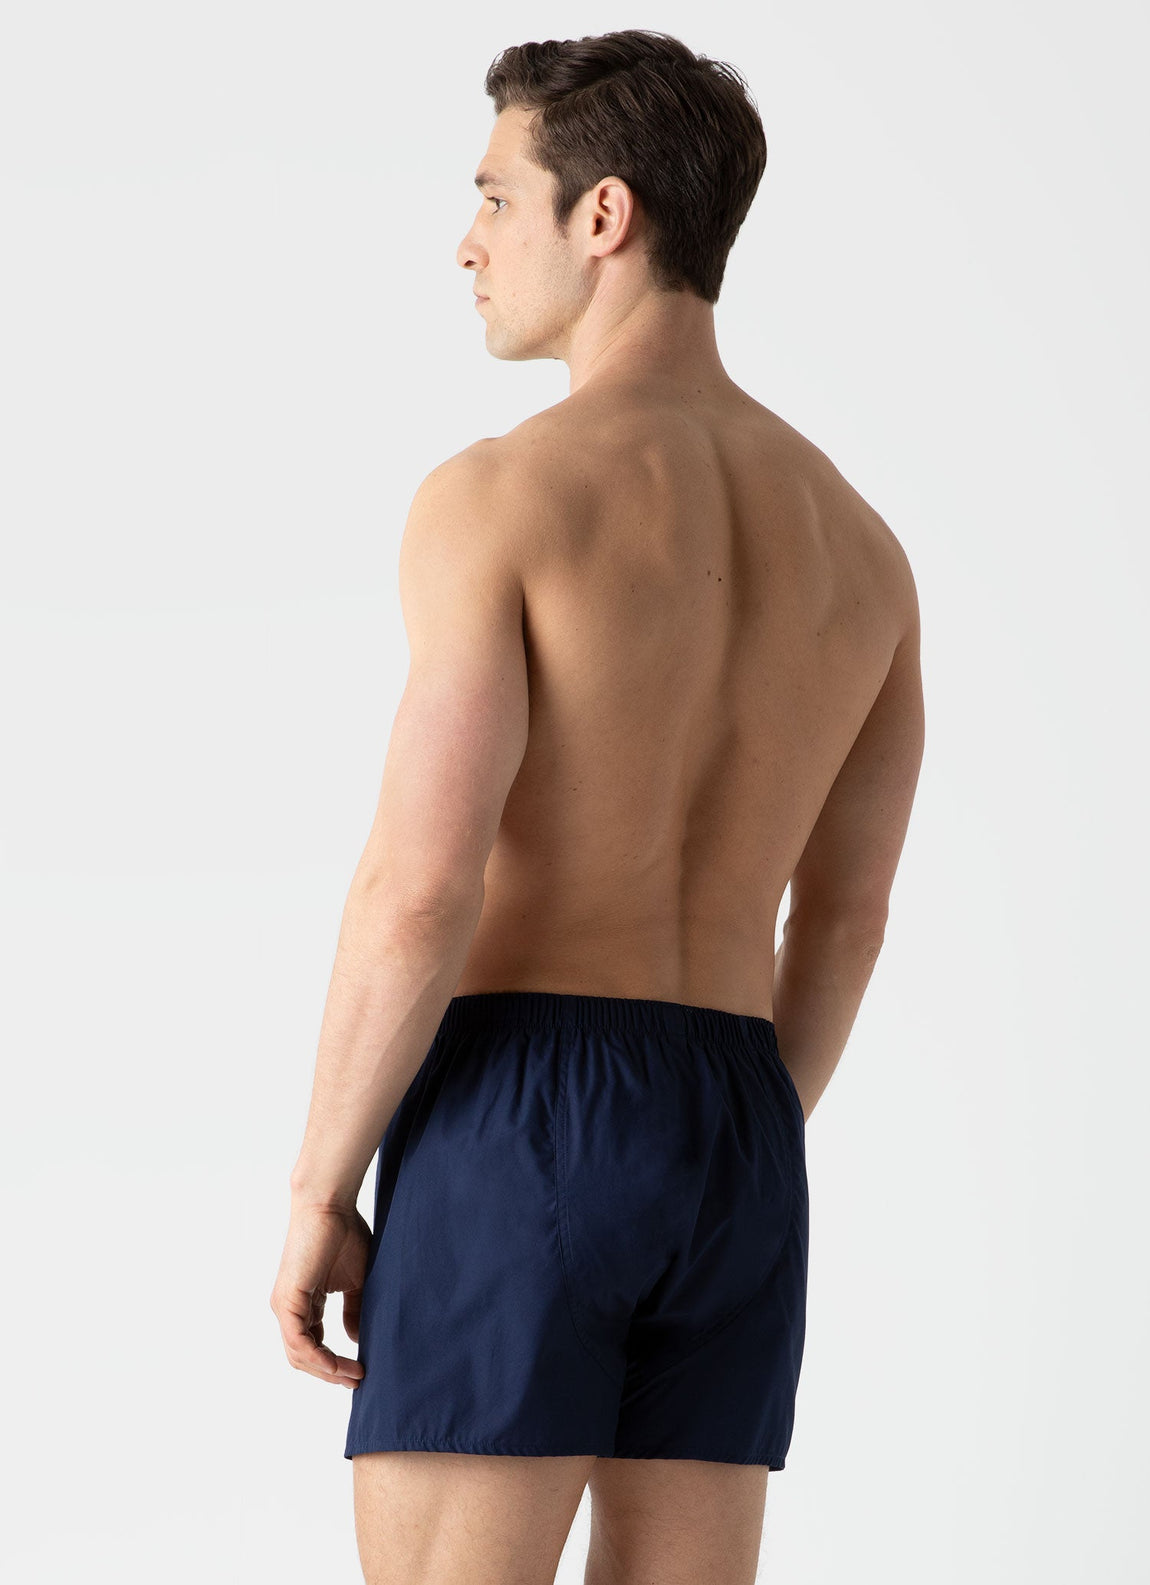 BOXERS CLASSIC NAVY BLUE